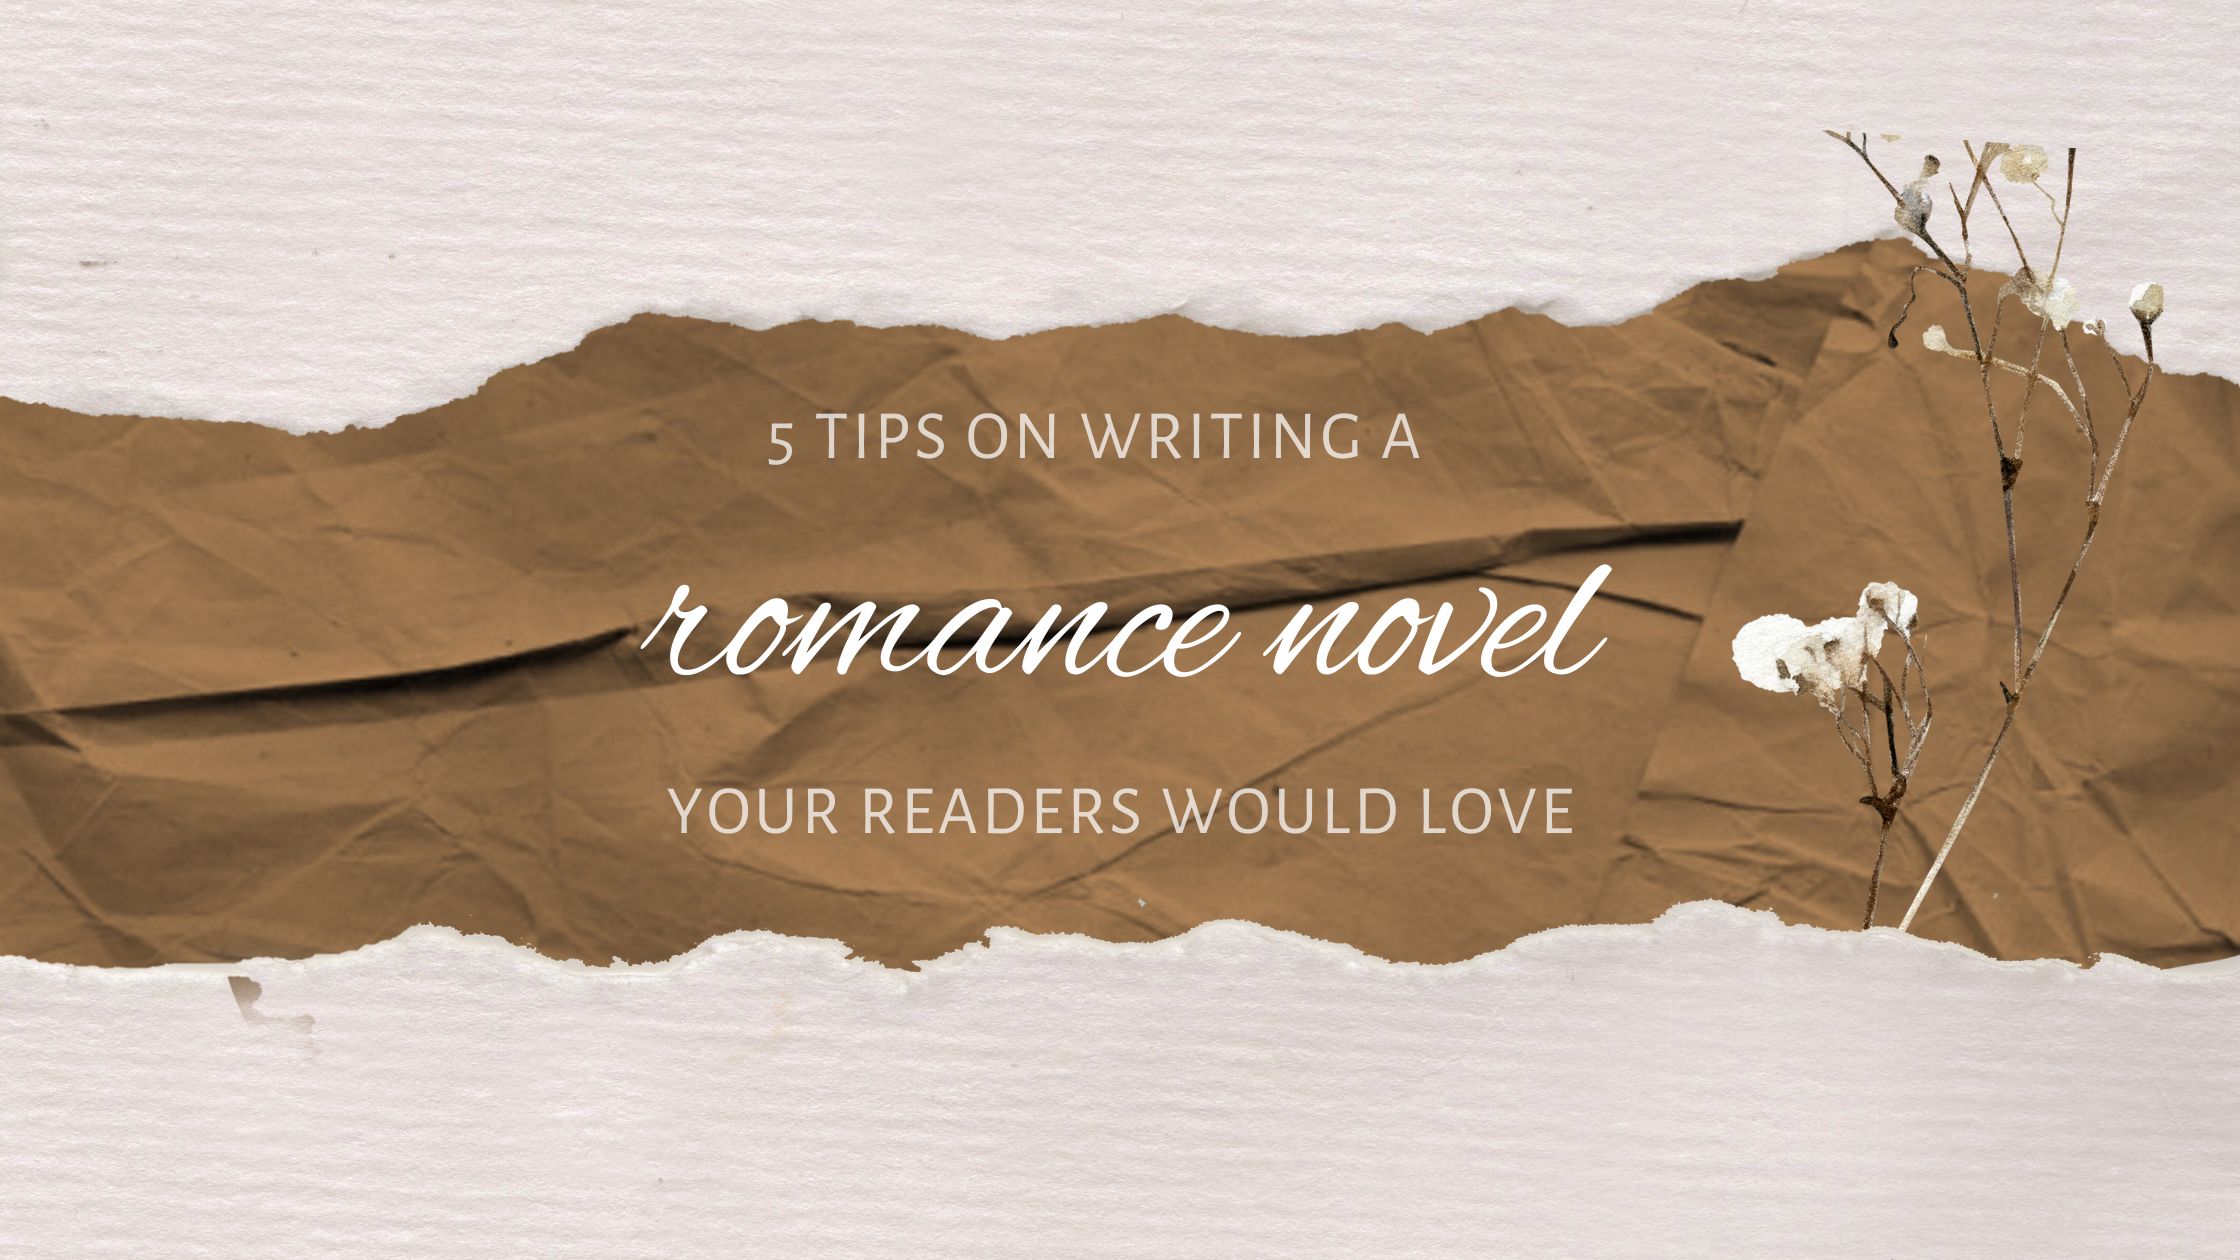 5 Tips on Writing a Romance Novel Your Readers Would Love